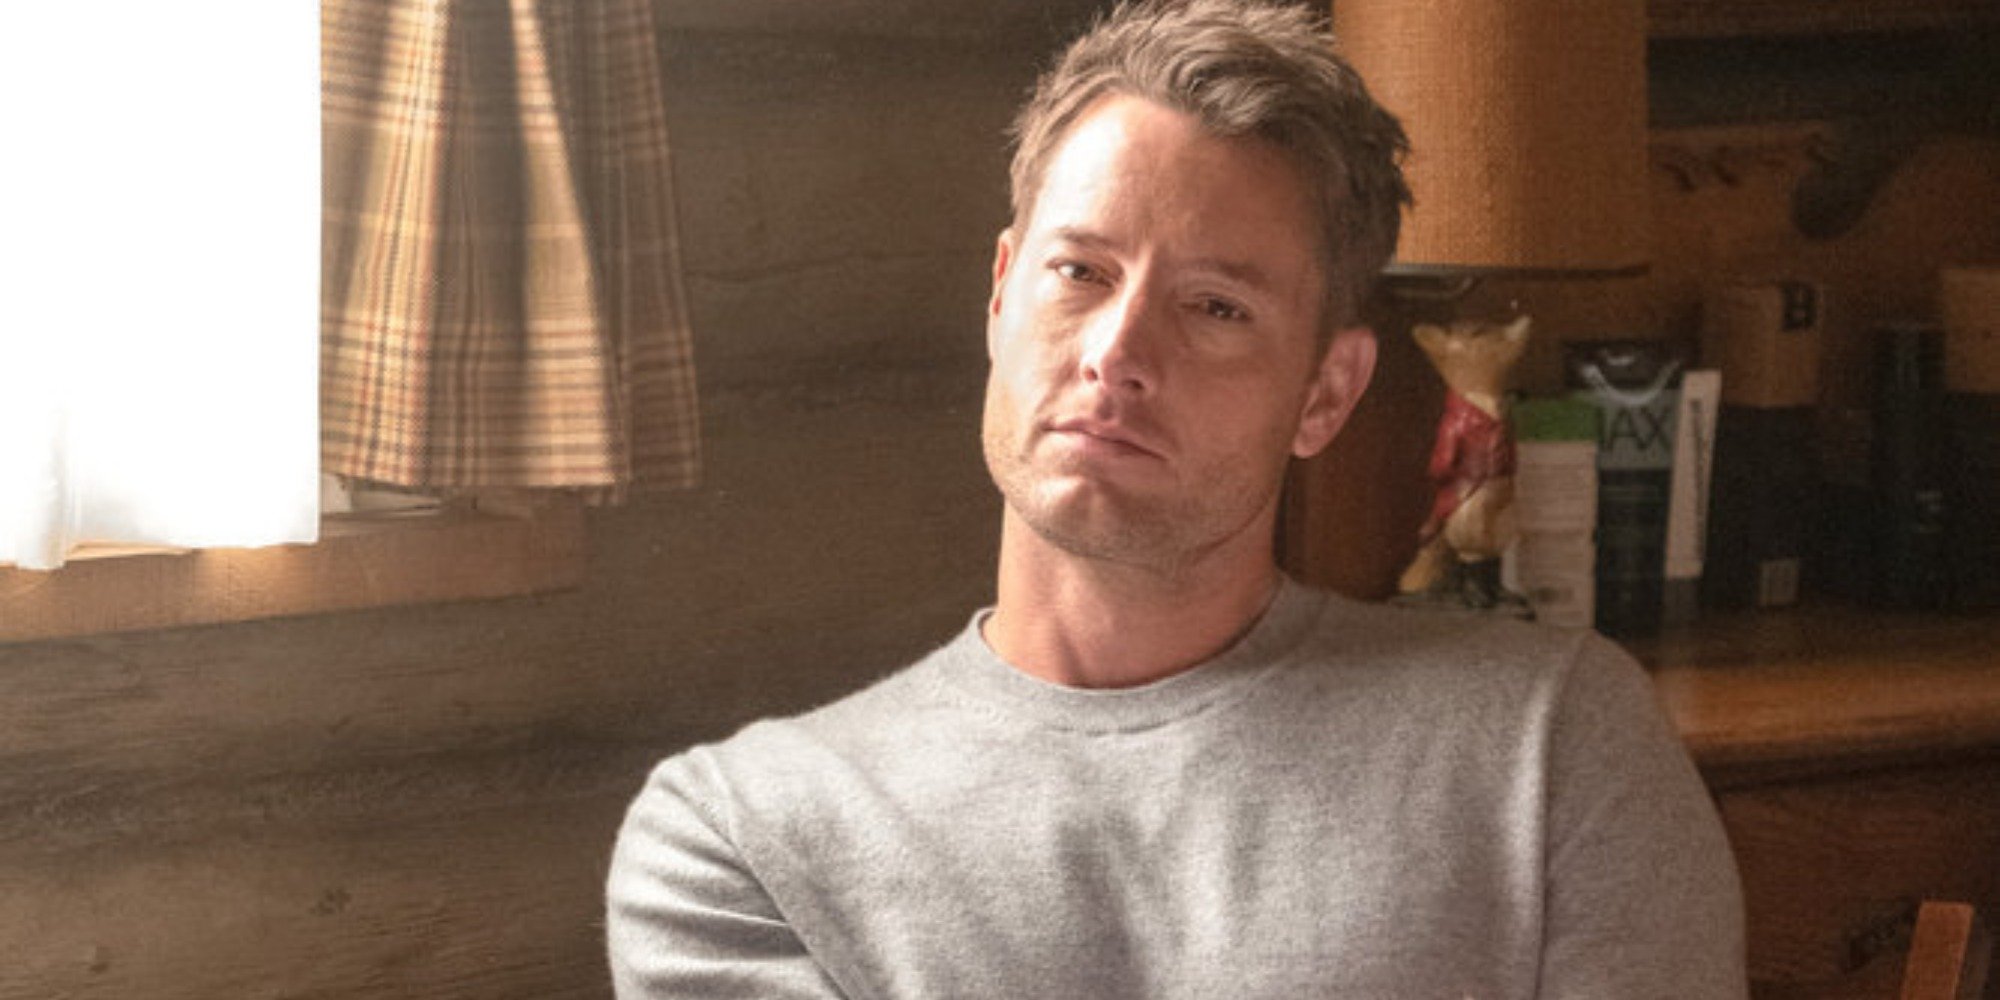 Justin Hartley plays Kevin Pearson on NBC's "This Is Us."